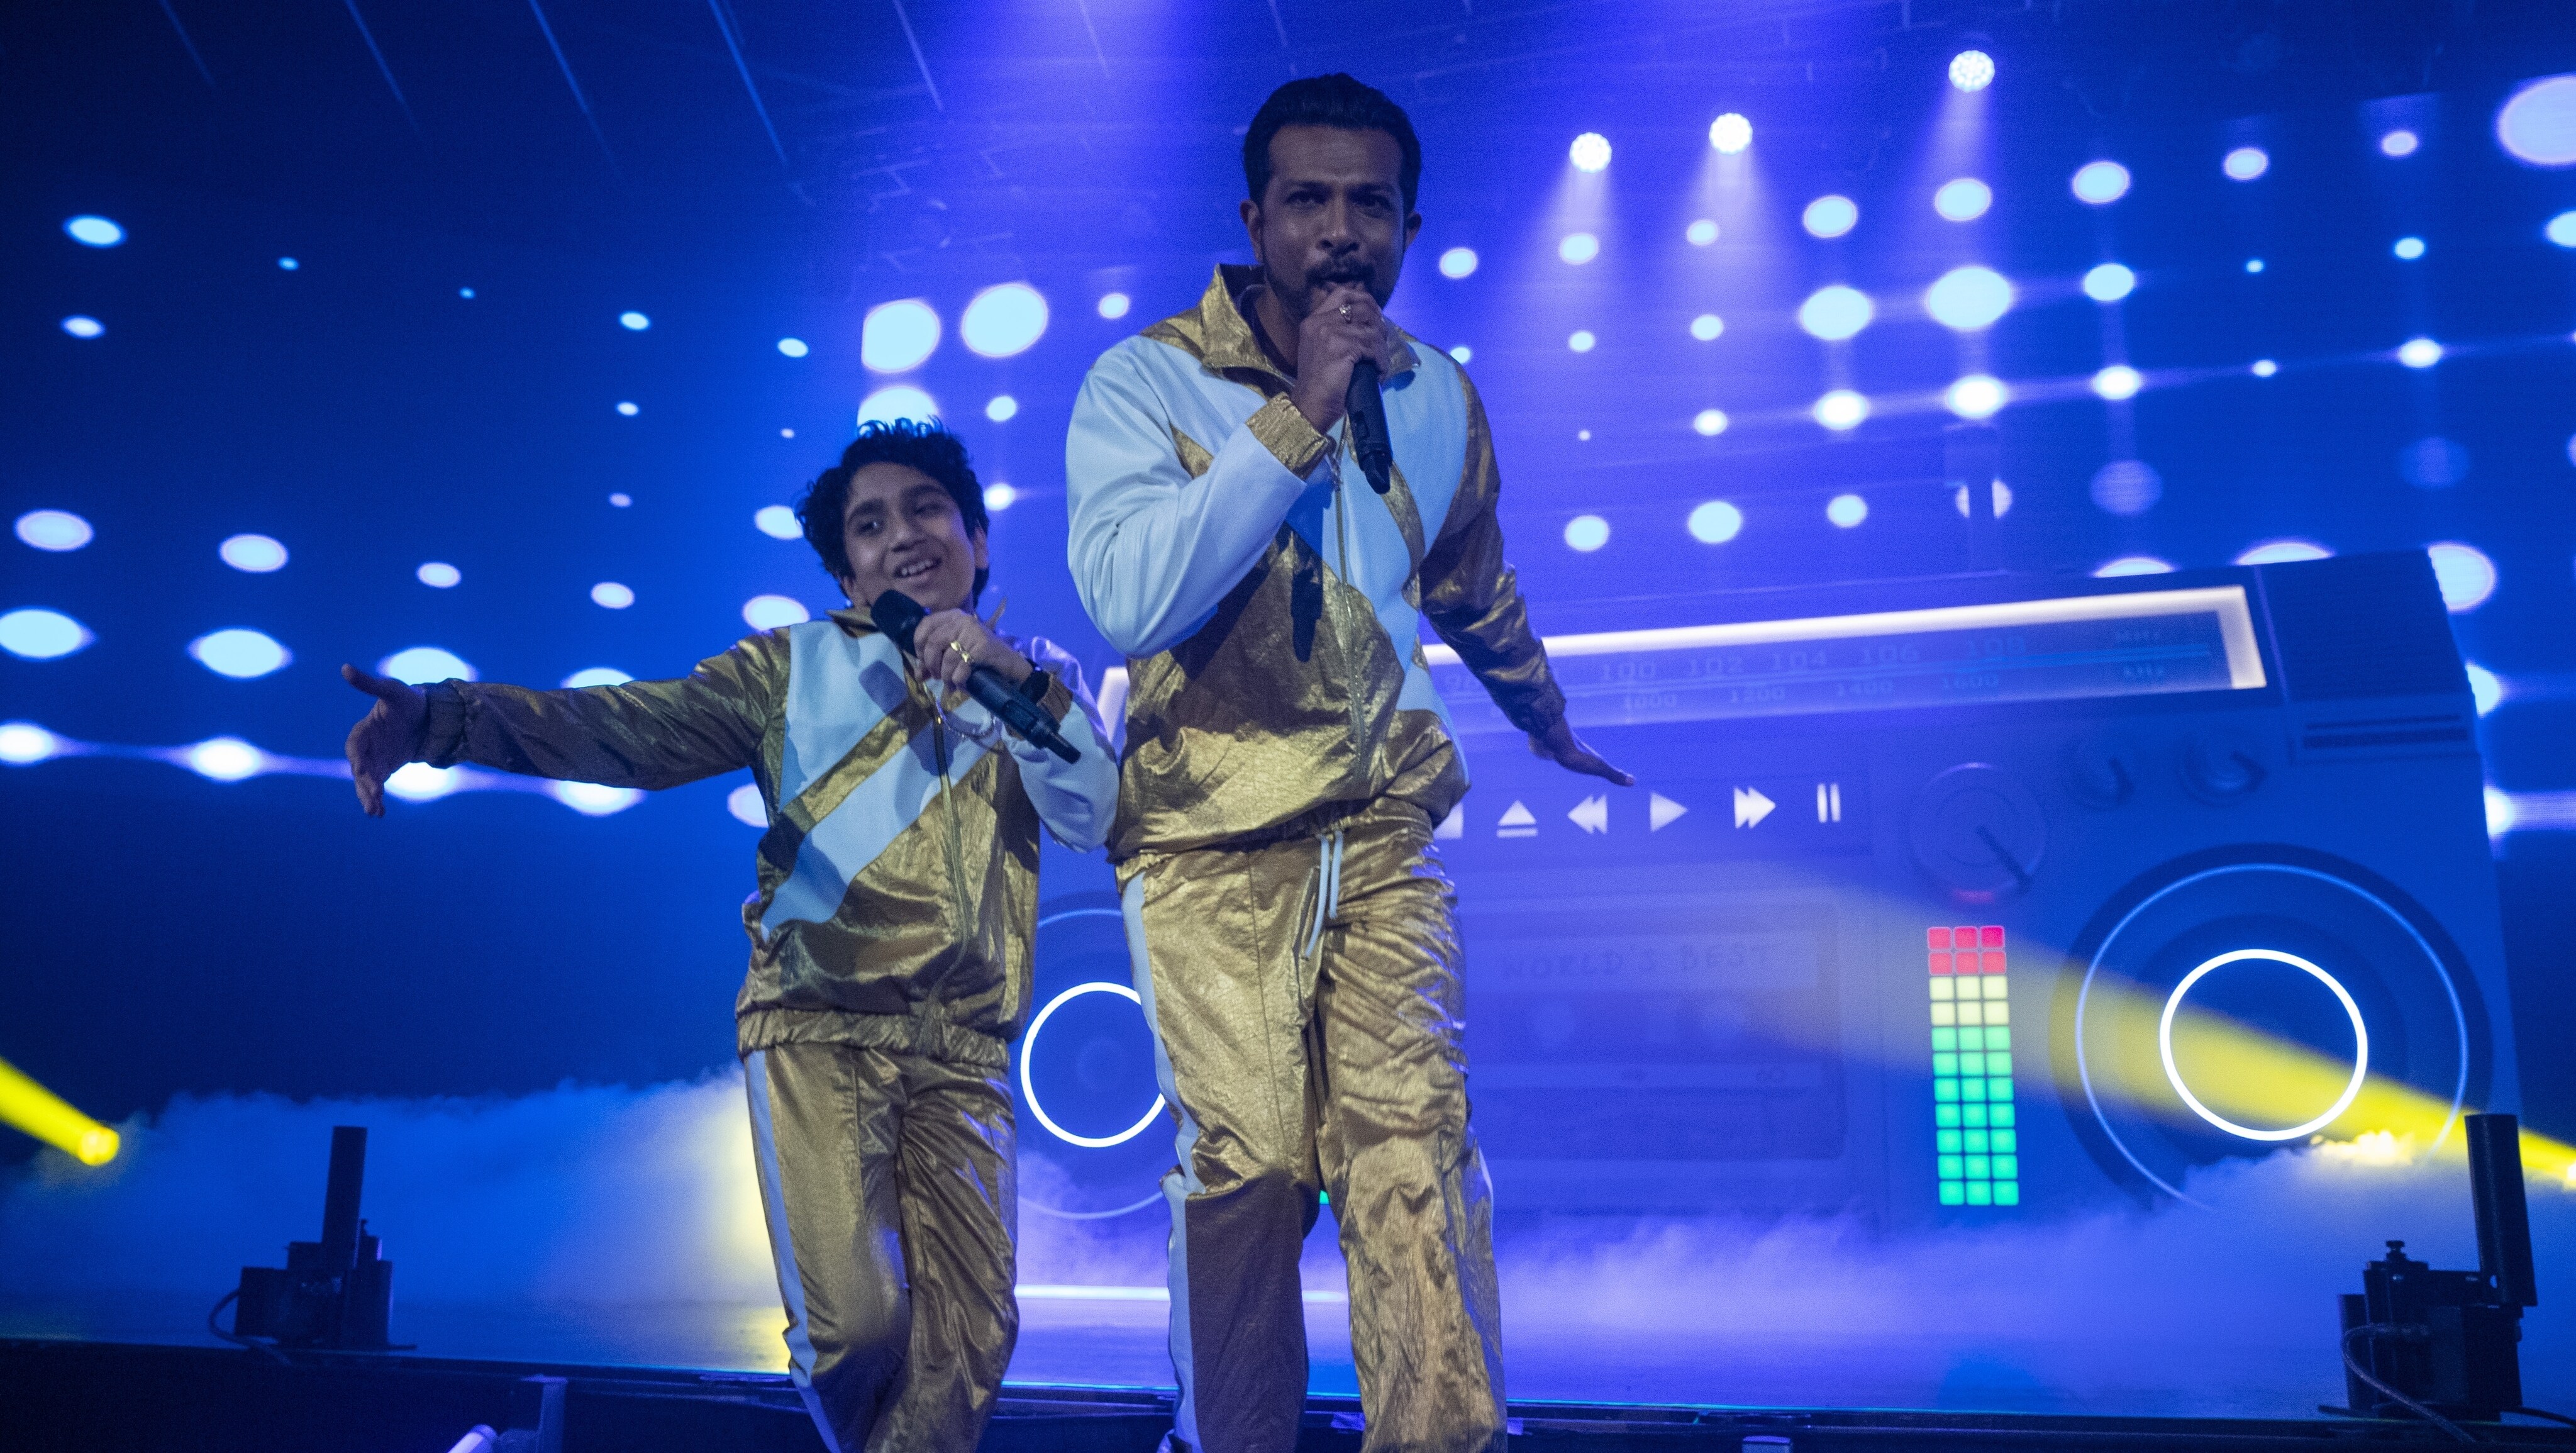 (L-R): Manny Magnus as Prem and Utkarsh Ambudkar as Suresh in WORLD'S BEST, exclusively on Disney+. Photo by Ben Mark Holzberg. © 2023 Disney Enterprises, Inc. All Rights Reserved.